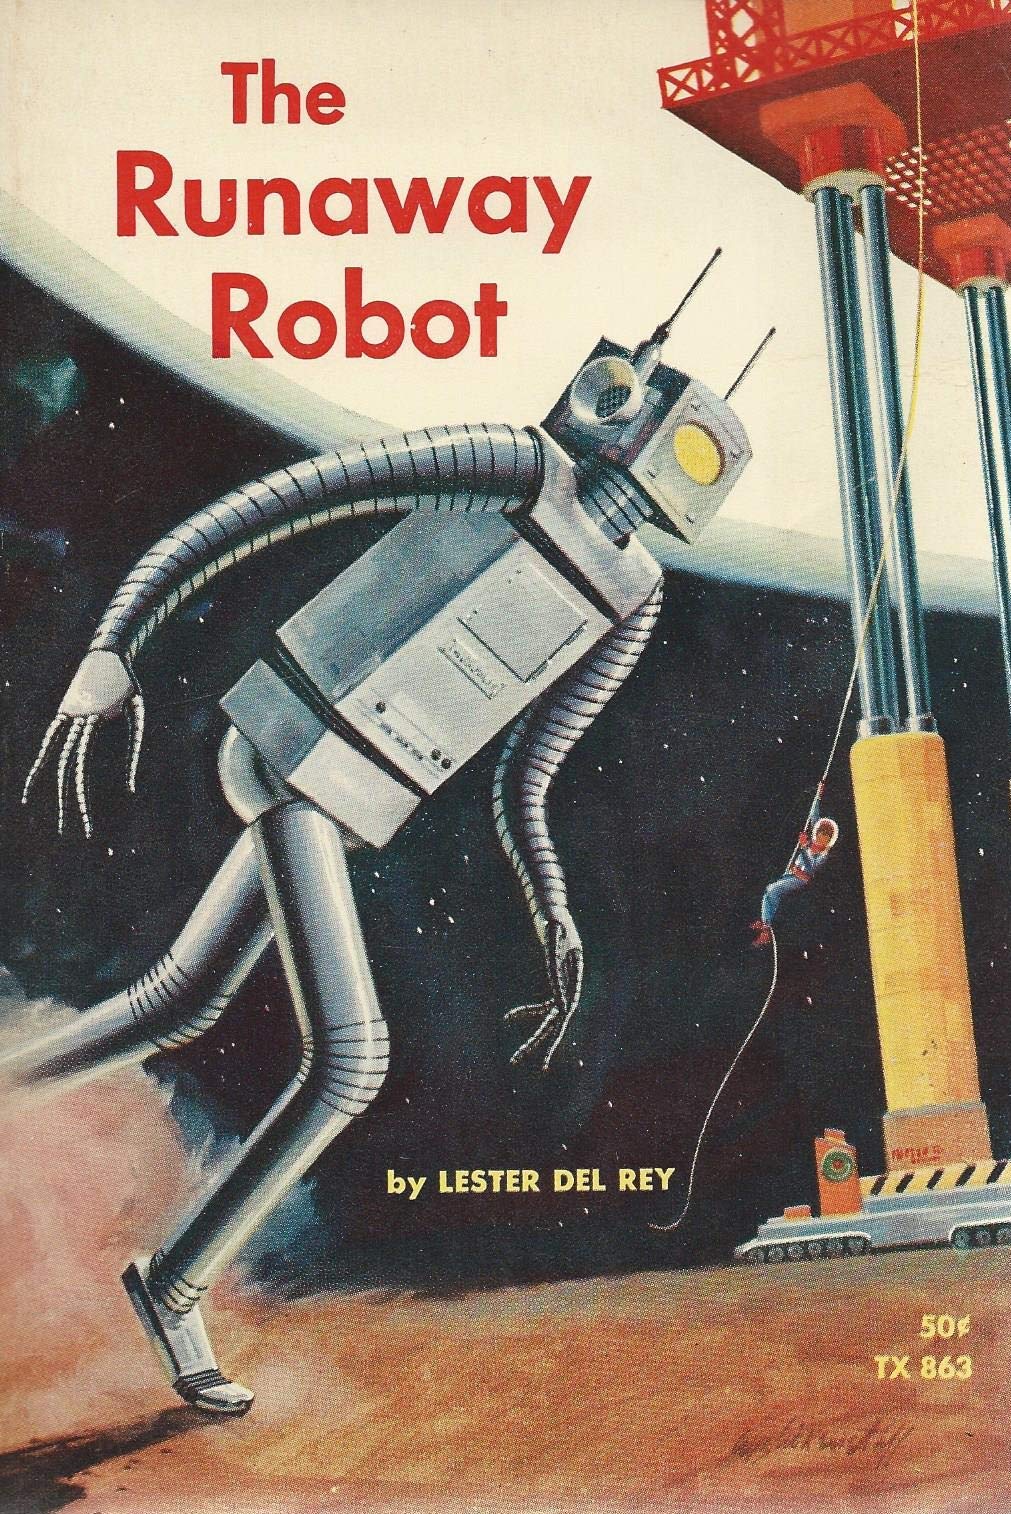 The Runaway Robot Vintage Sci-Fi Book Cover